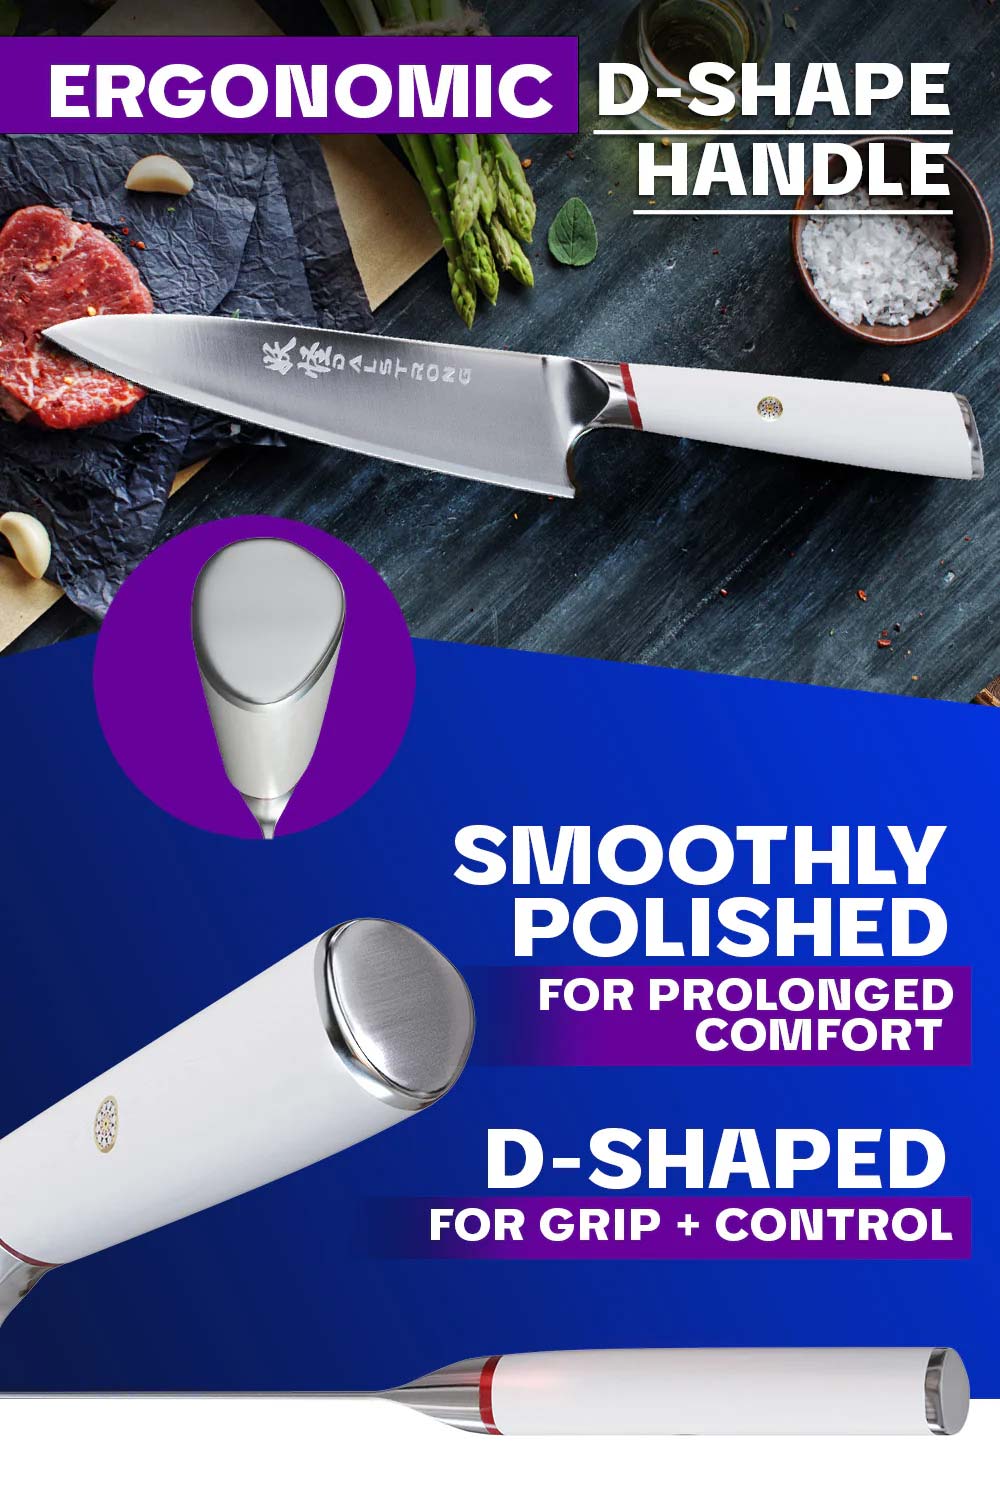 Dalstrong phantom series 8 inch chef knife featuring it's ergonomic d-shape white handle.